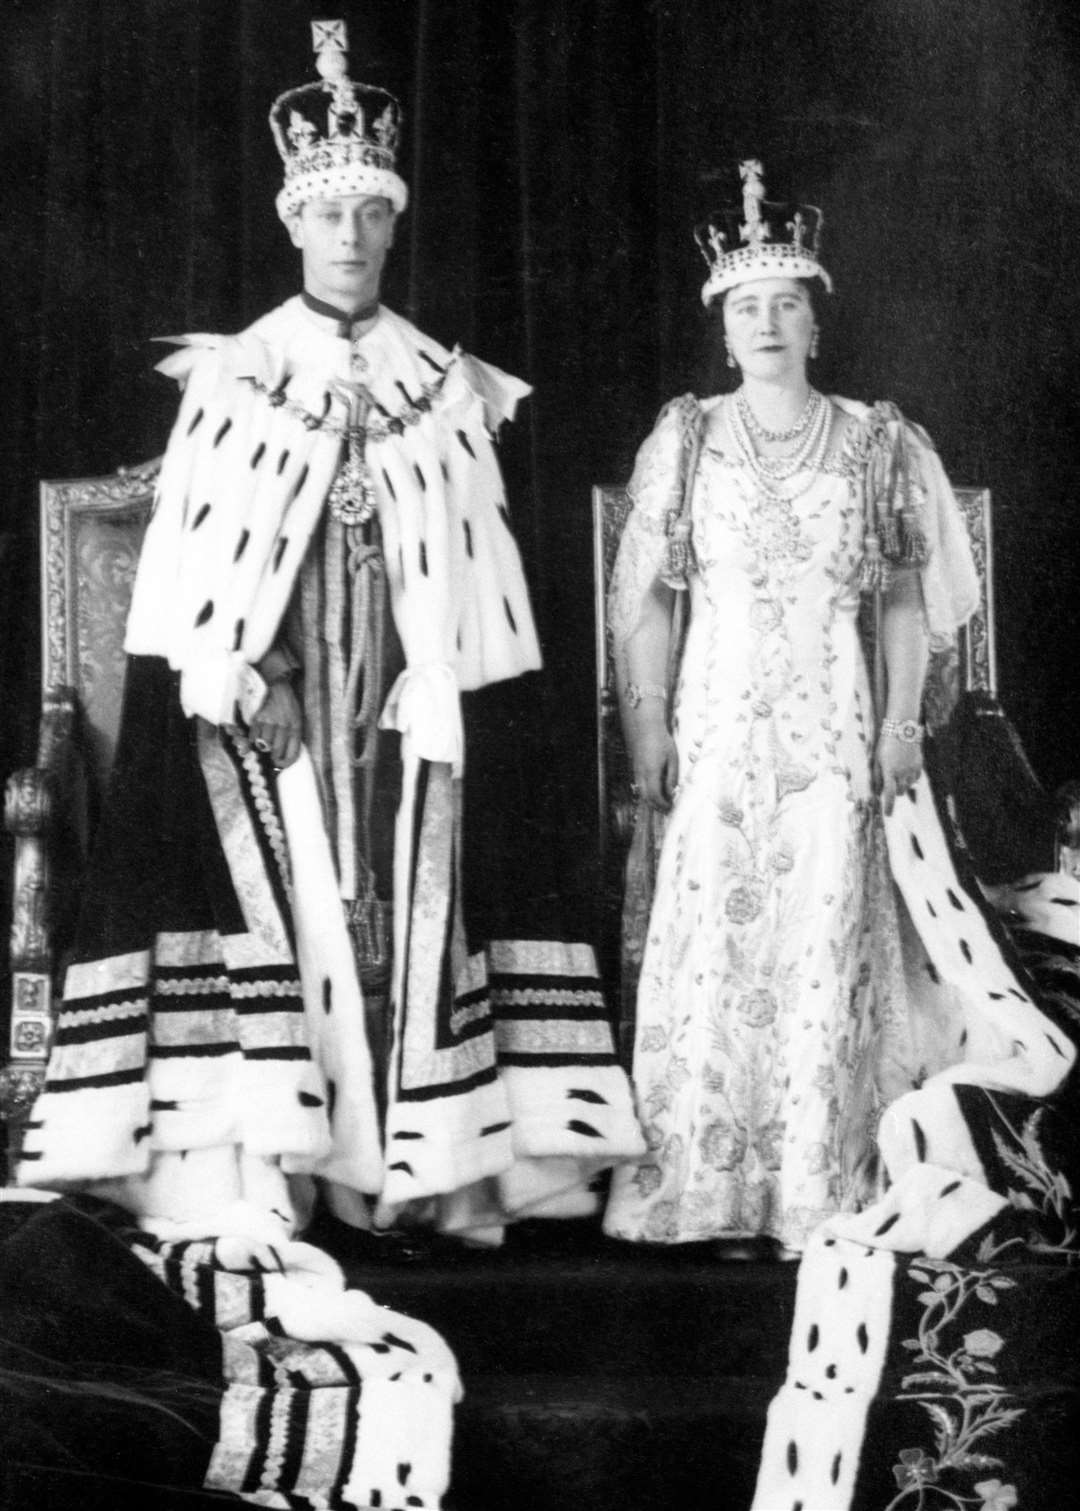 King George VI and his wife Queen Elizabeth after the coronation in 1937 (PA)